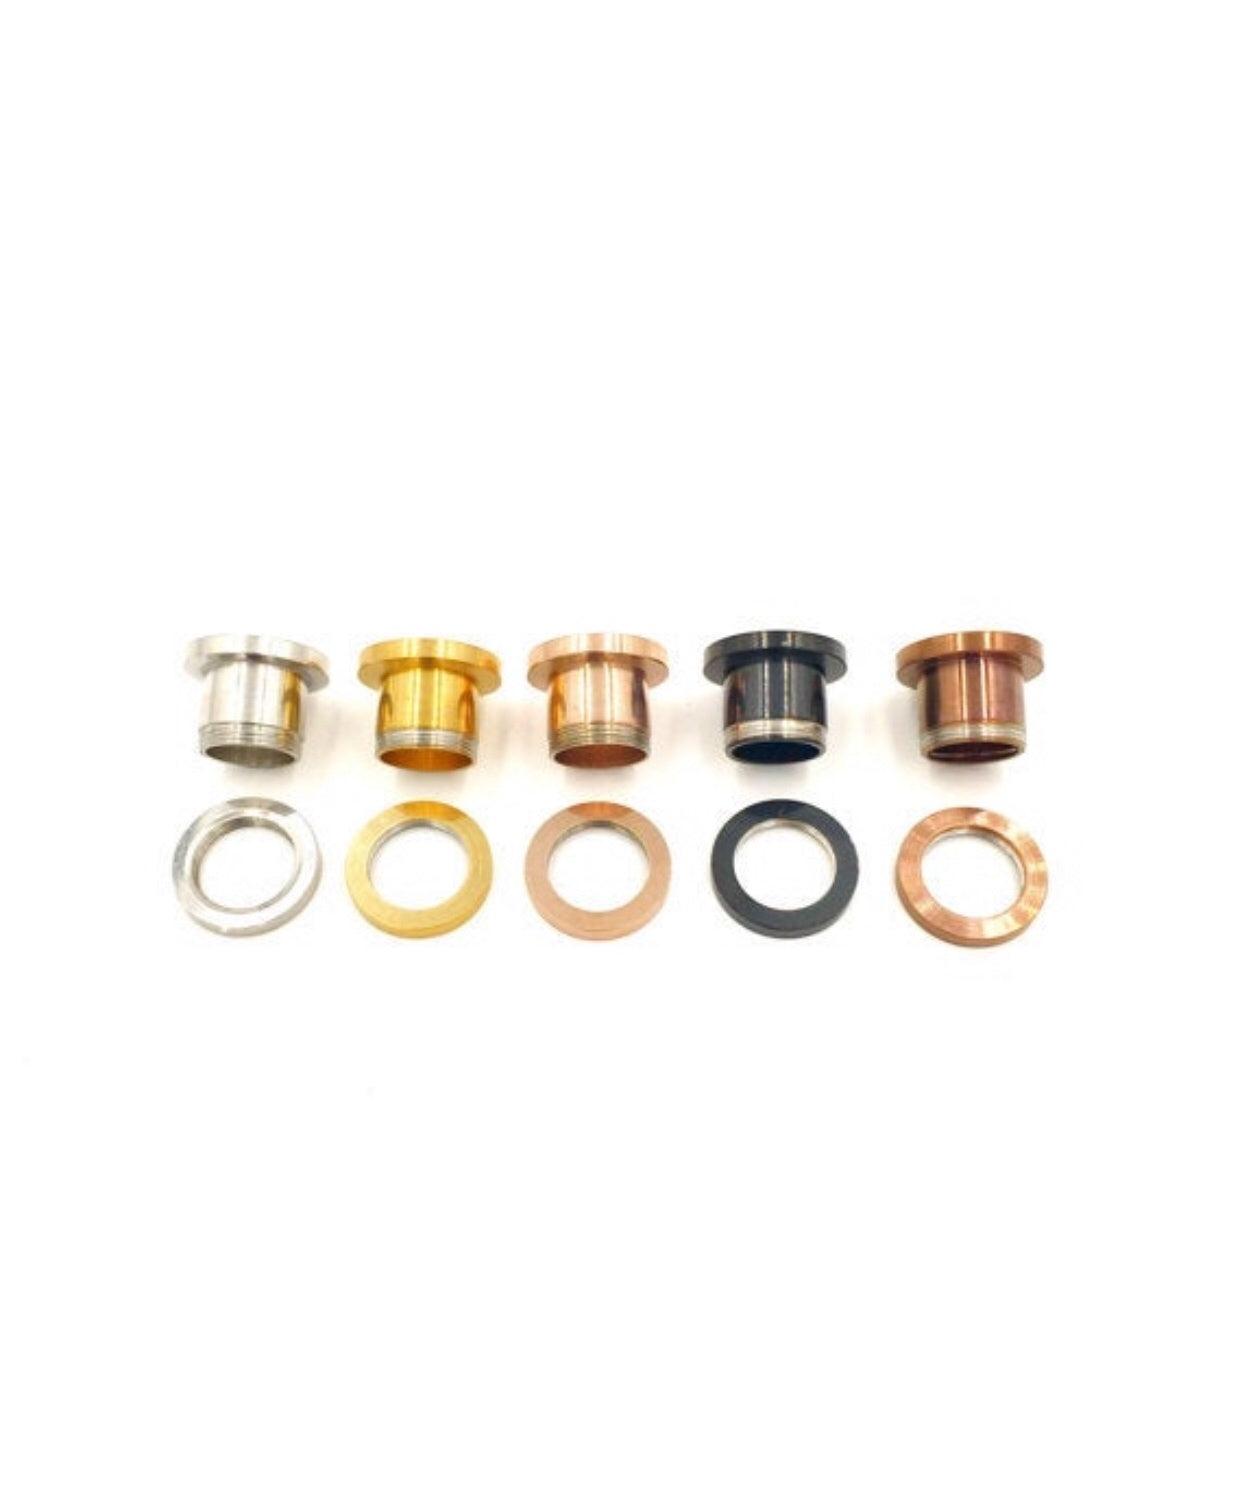 Deep Gold Shimmer Tunnel Plugs